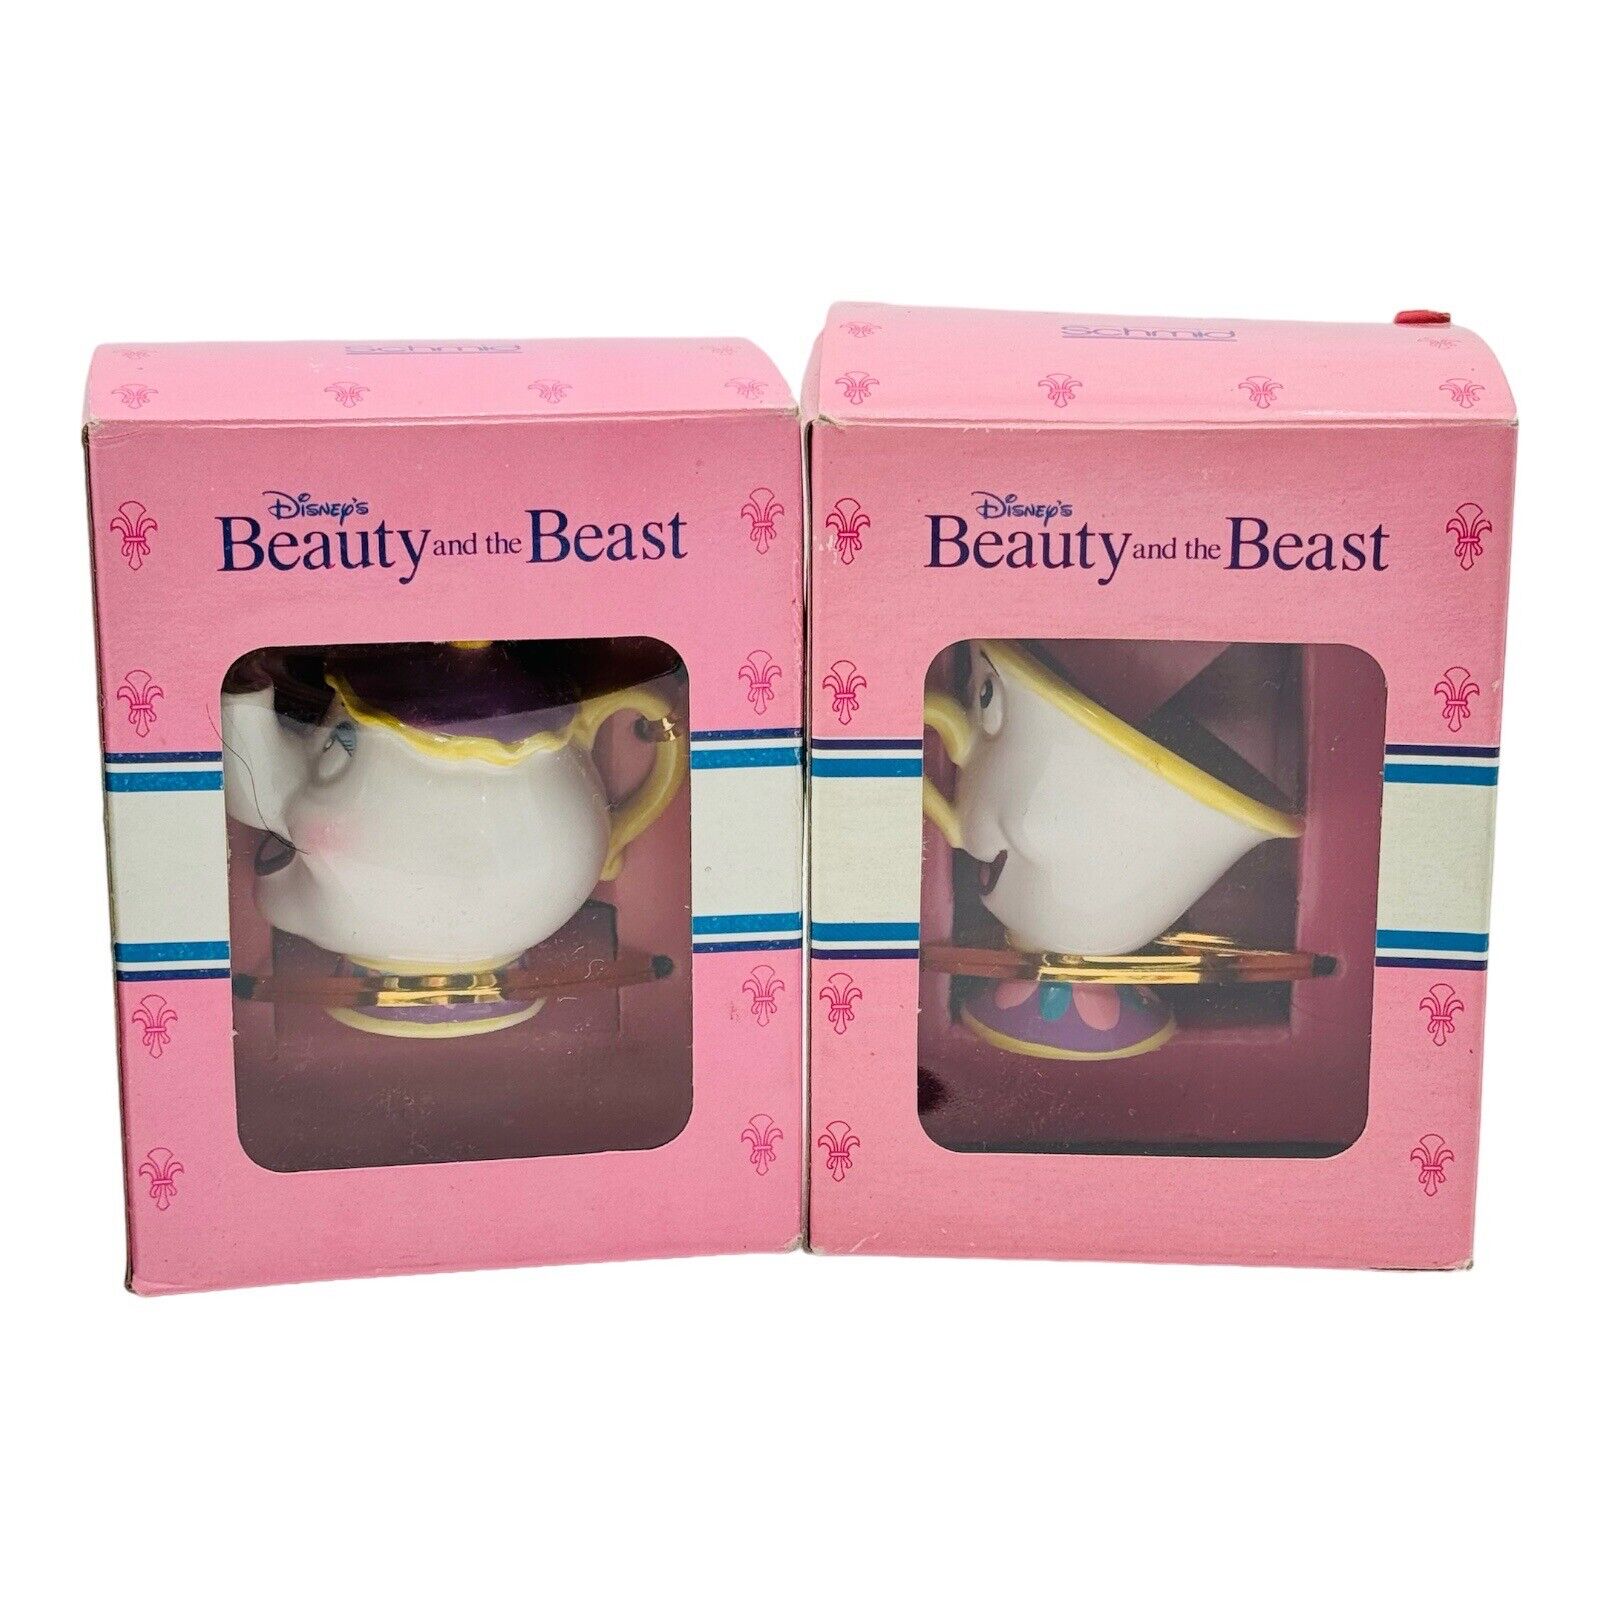 Schmid Disney’s Beauty And The Beast Set Of 2 Mrs Potts Chip Figurine NEW IN BOX